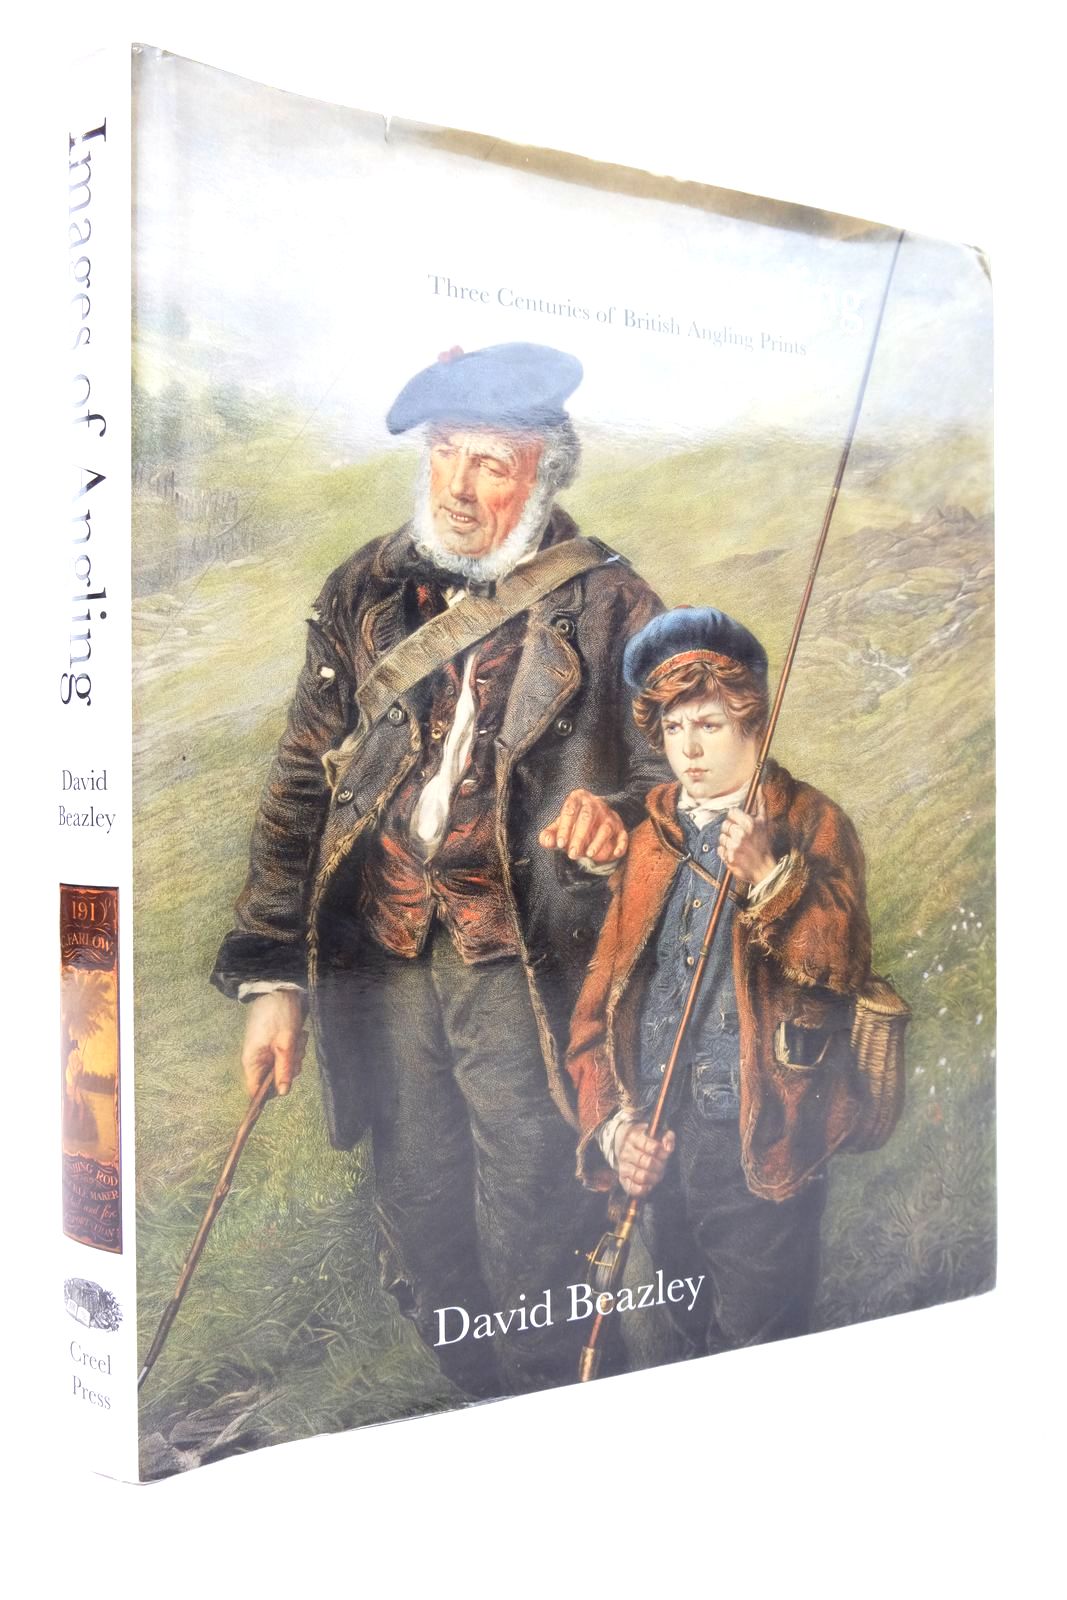 Photo of IMAGES OF ANGLING: AN ILLUSTRATED REVIEW OF THREE CENTURIES OF BRITISH ANGLING PRINTS written by Beazley, David published by Creel Press (STOCK CODE: 2140078)  for sale by Stella & Rose's Books